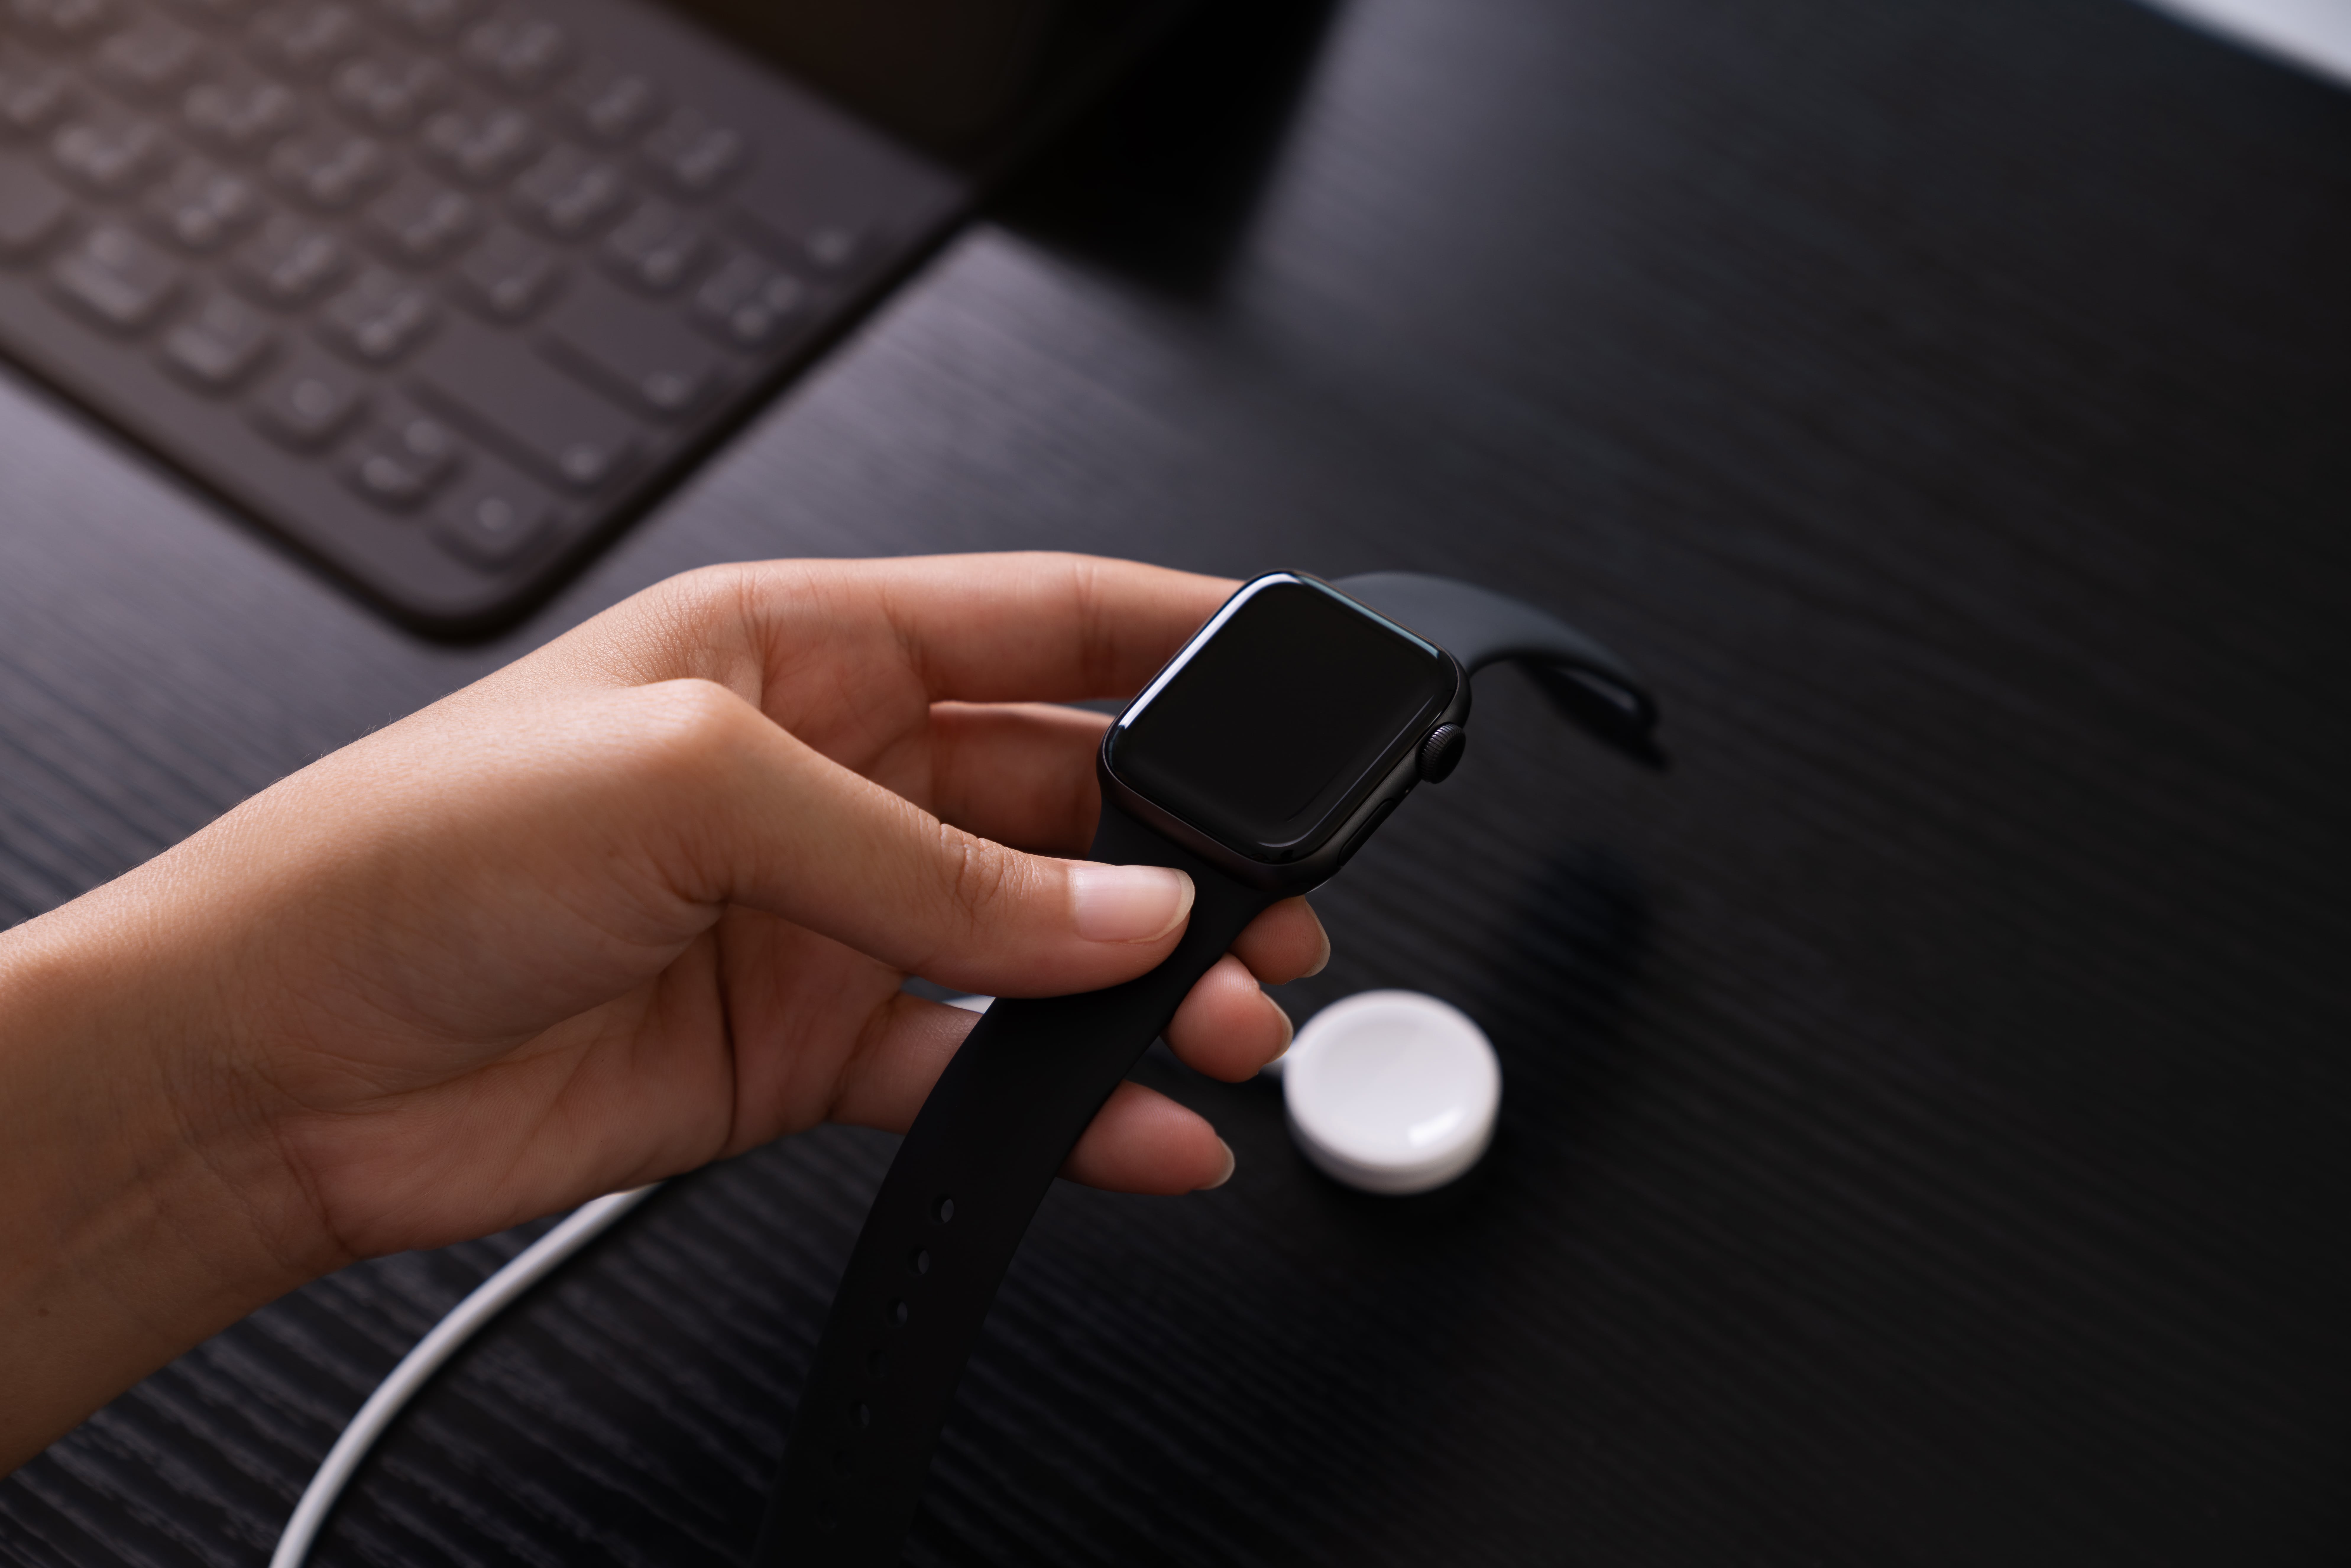 Apple watch chargers are a must-have accessory, check out the best ones for 2022.